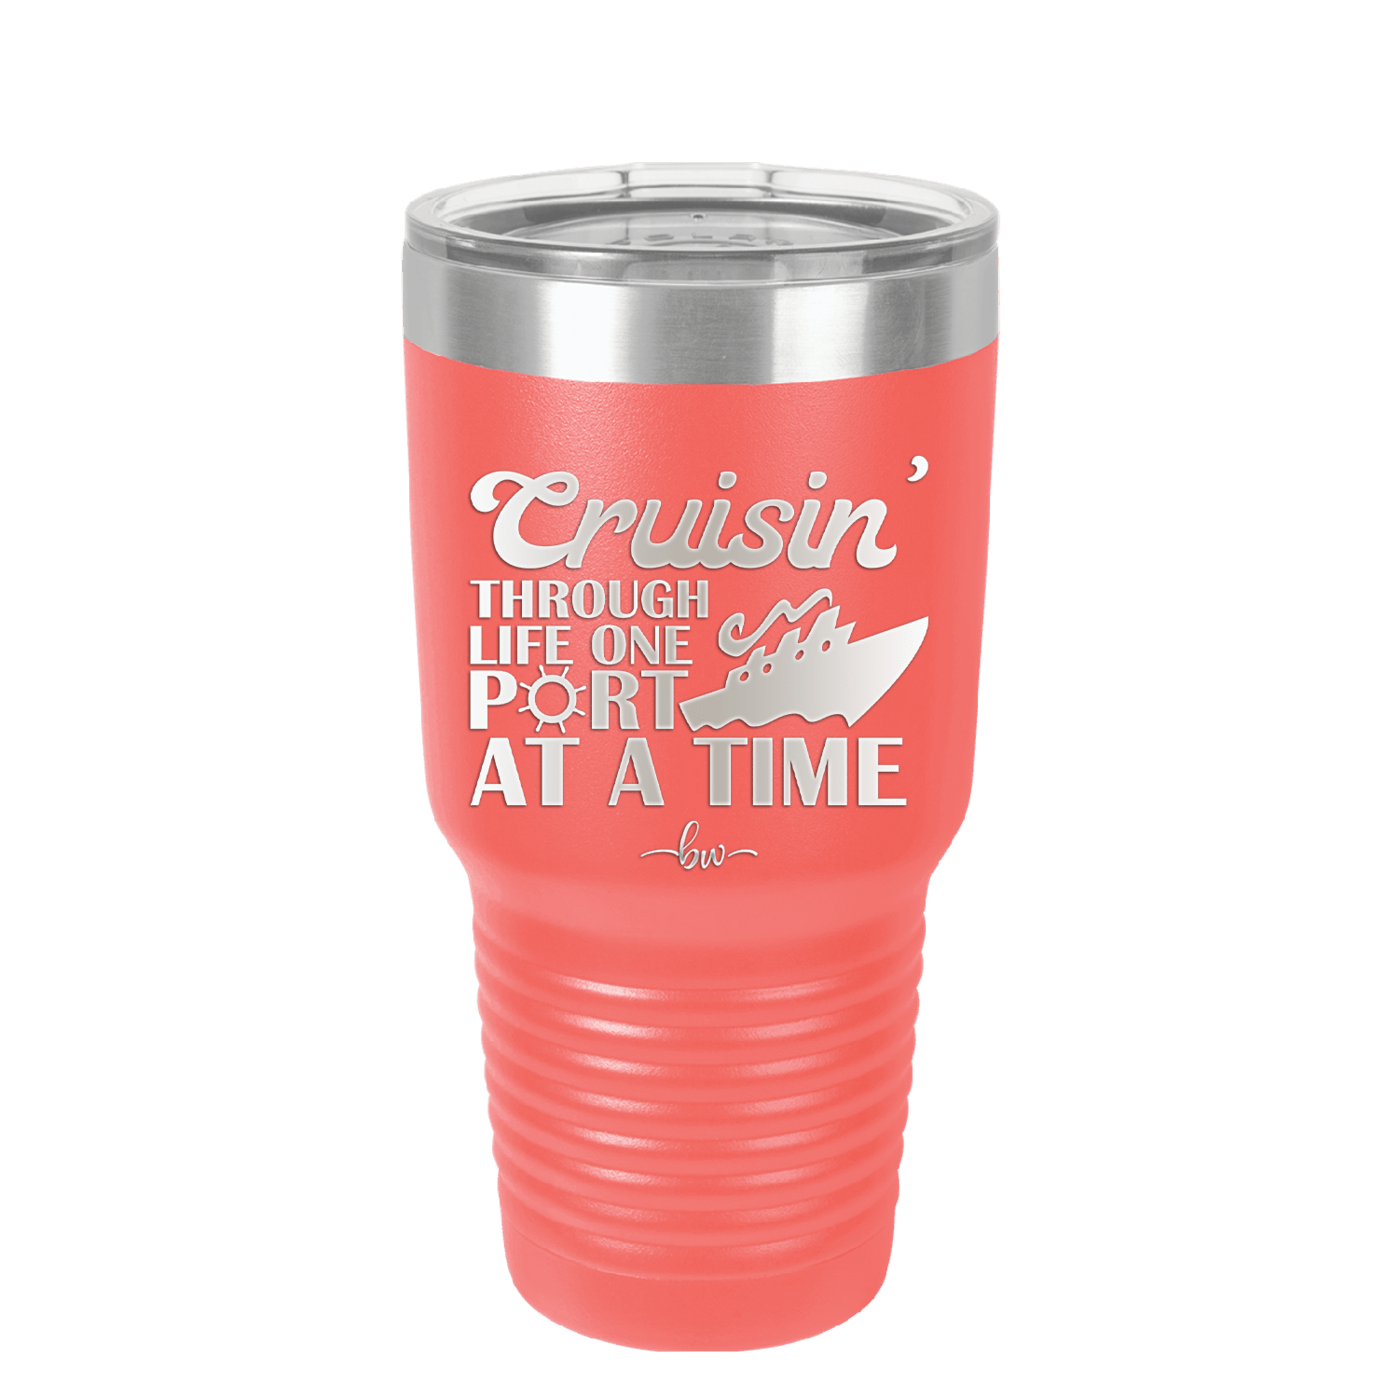 Cruisin Through Life One Port at a Time Cruise 1 - Laser Engraved Stainless Steel Drinkware - 1447 -